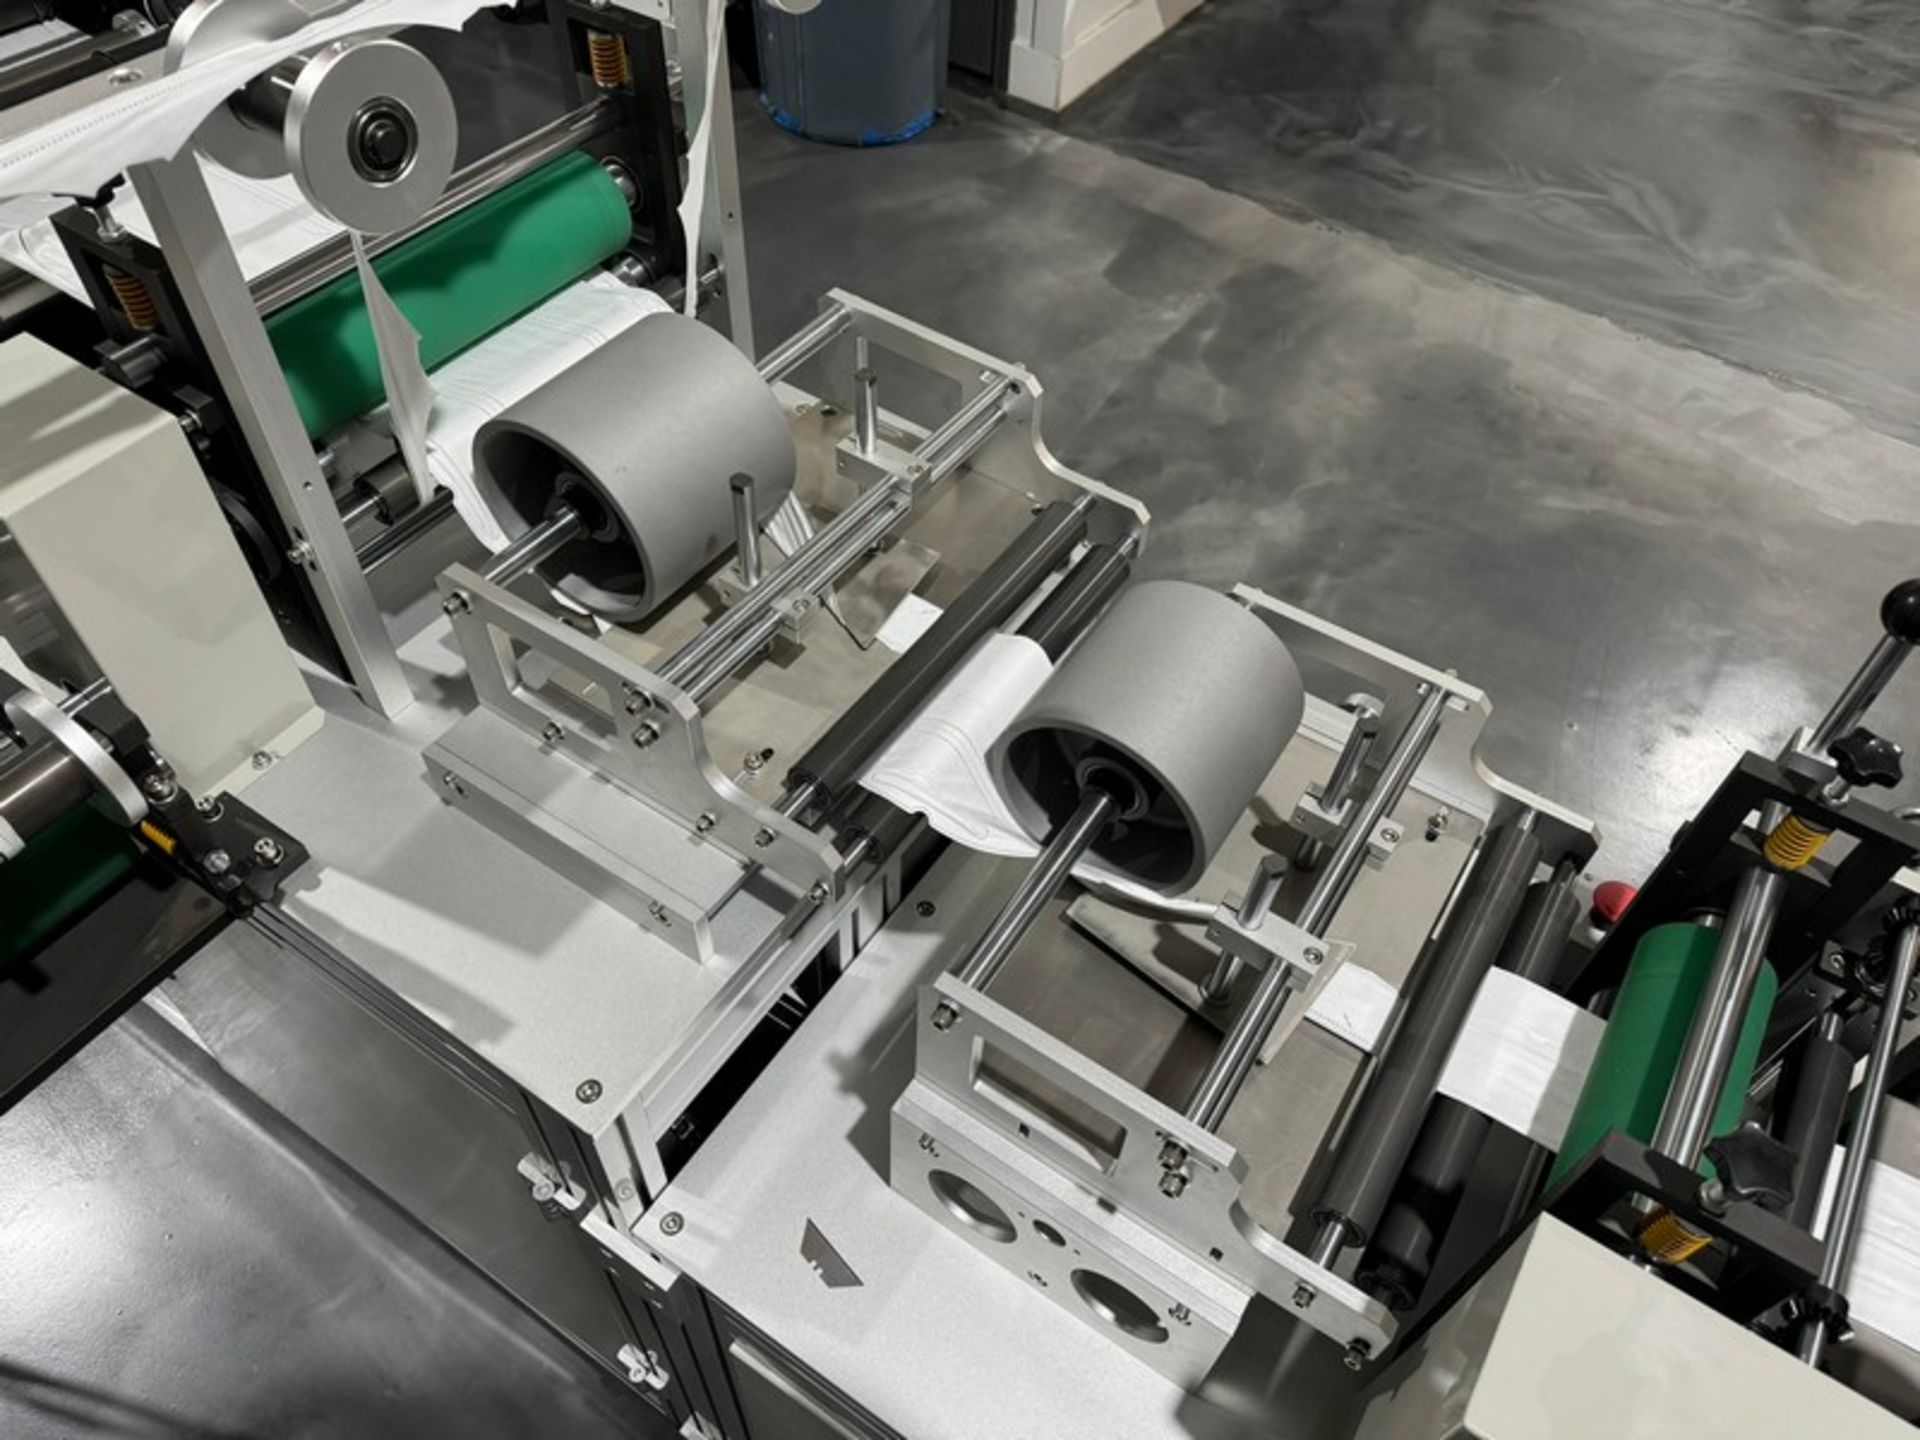 2022 KYD Automatic 6,000 Units Per Hour Mask Manufacturing Line, Includes Unwinding Station, Rolling - Bild 14 aus 30